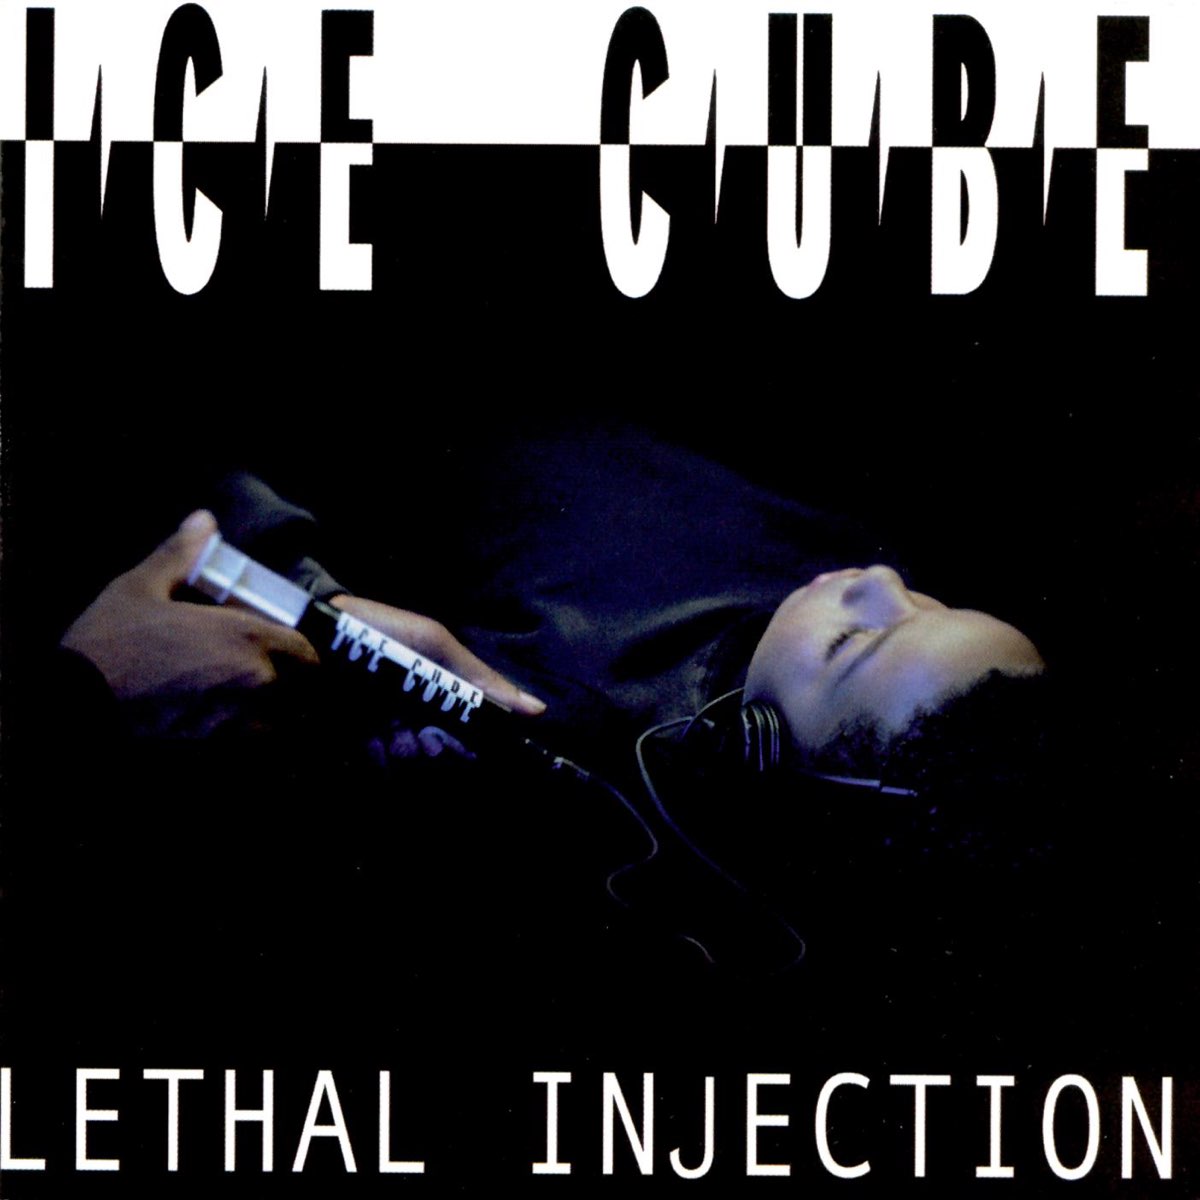 Ice cube you know how. Ice Cube Lethal Injection 1993. Ice Cube Lethal Injection. Letal Injection Ice Cube. Ice Cube you know how we do.